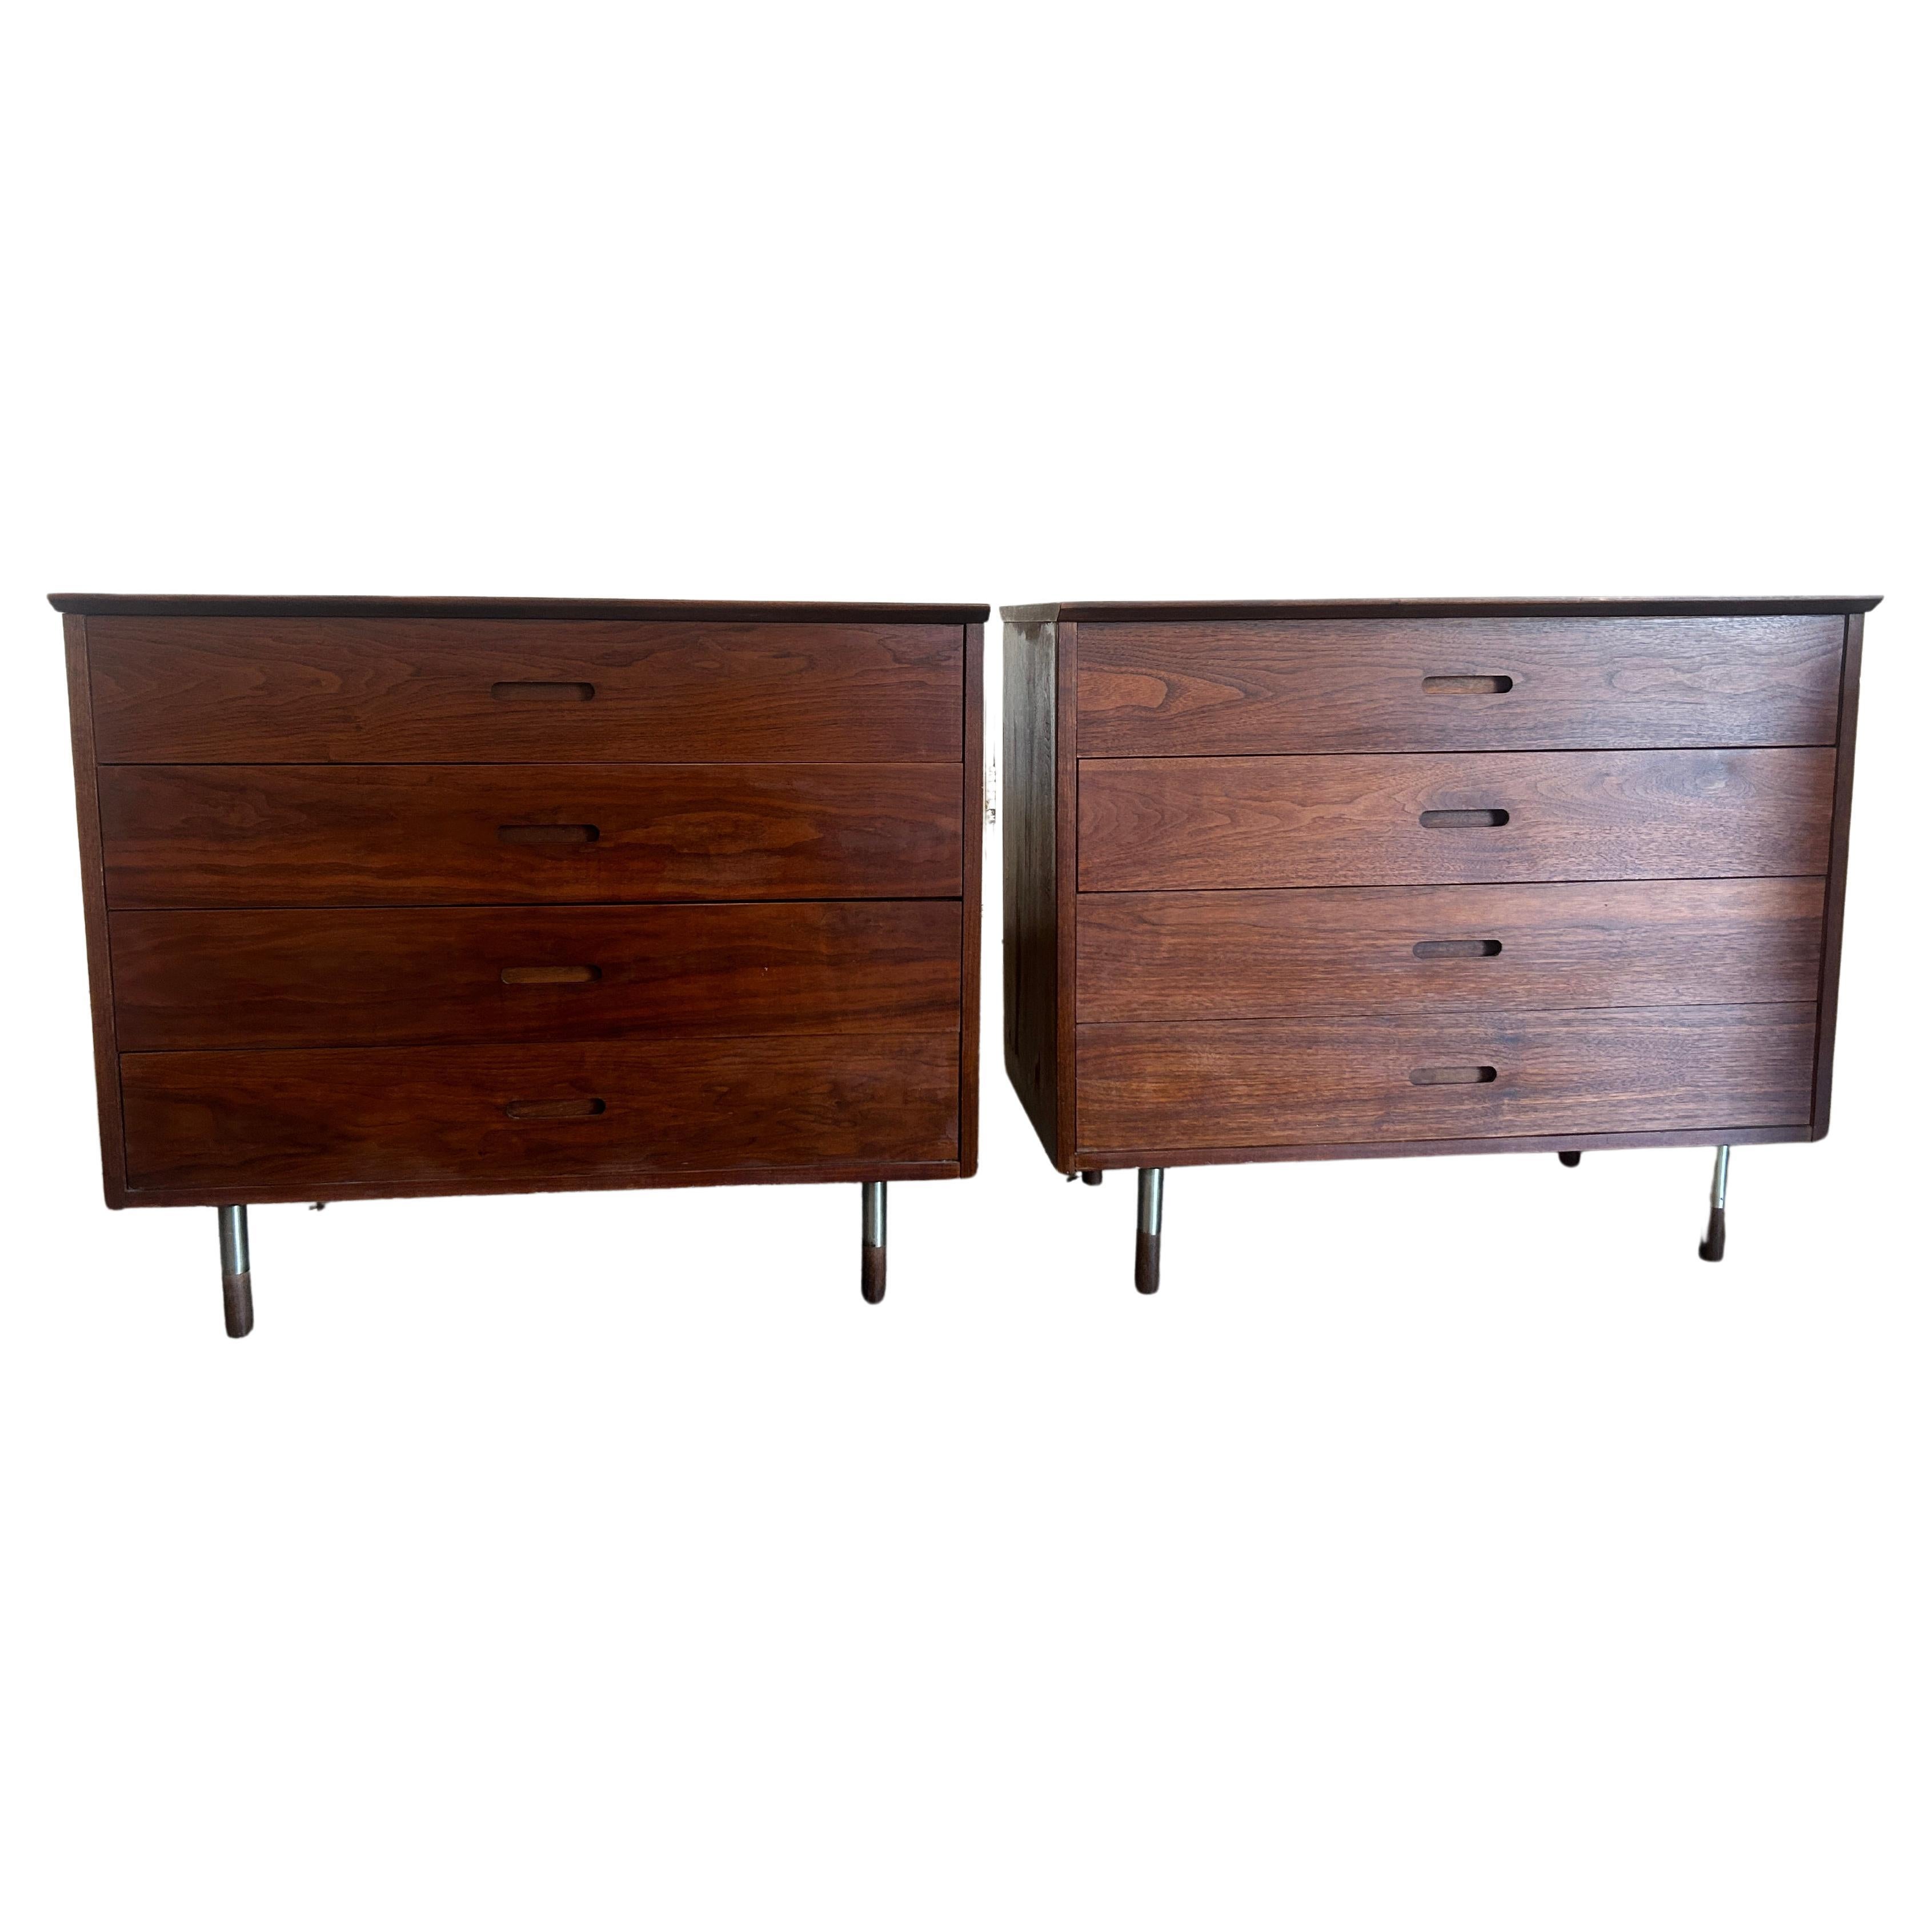 Pair of mid century 4 drawer walnut dressers by founders